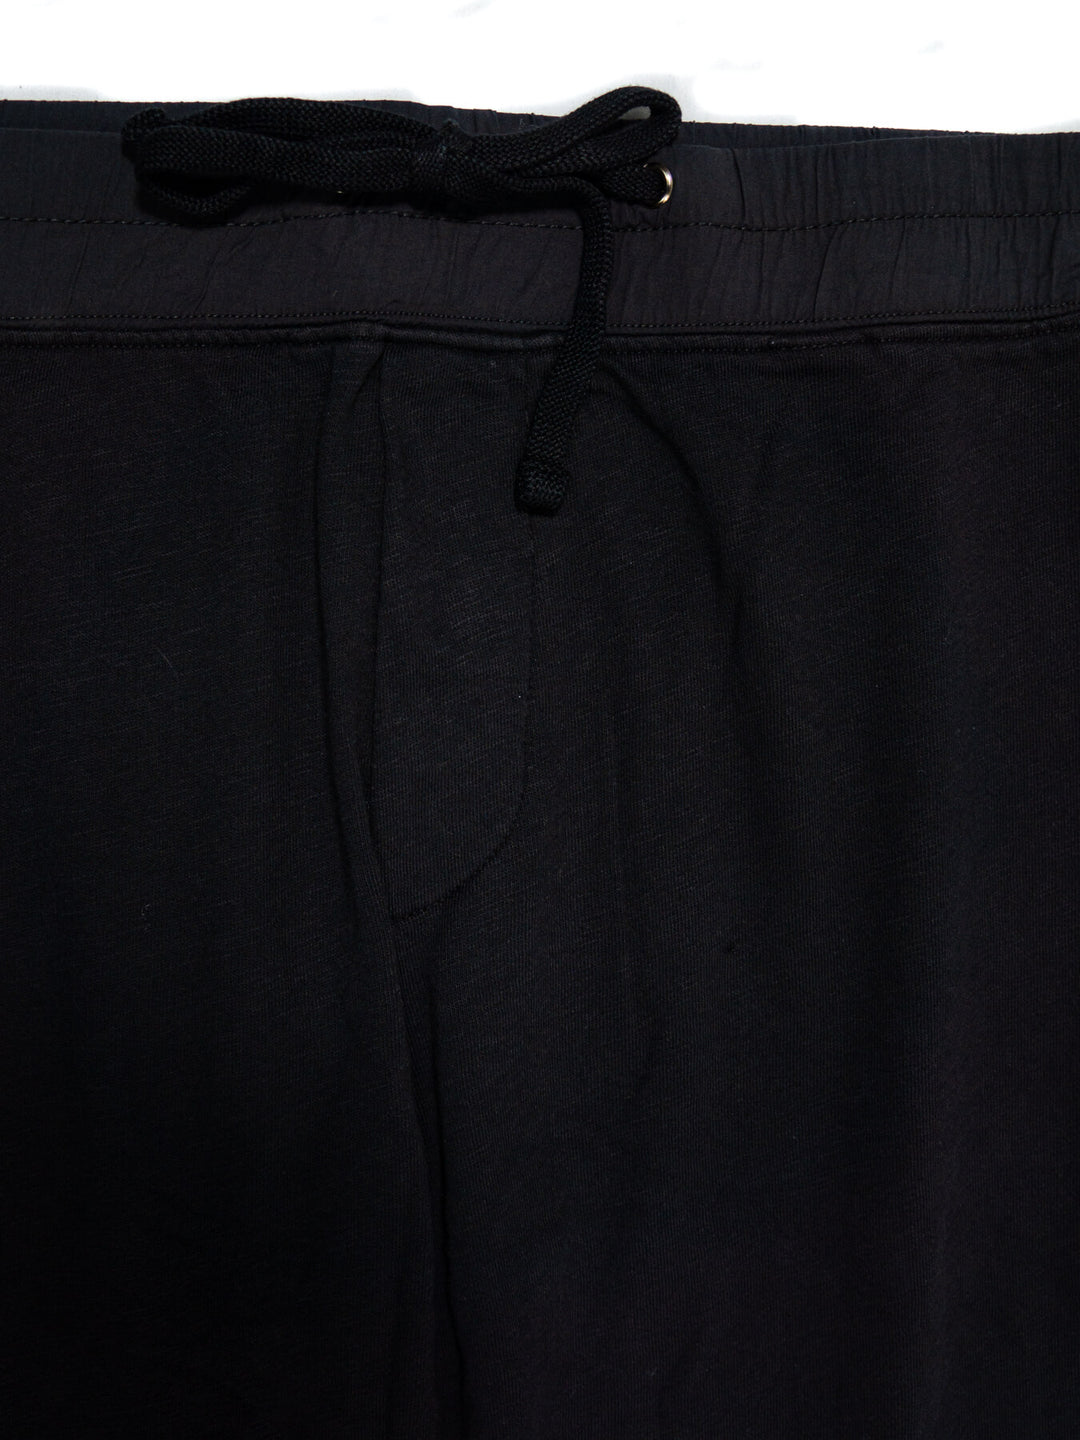 JAMES PERSE FRENCH TERRY SWEATPANT IN BLACK